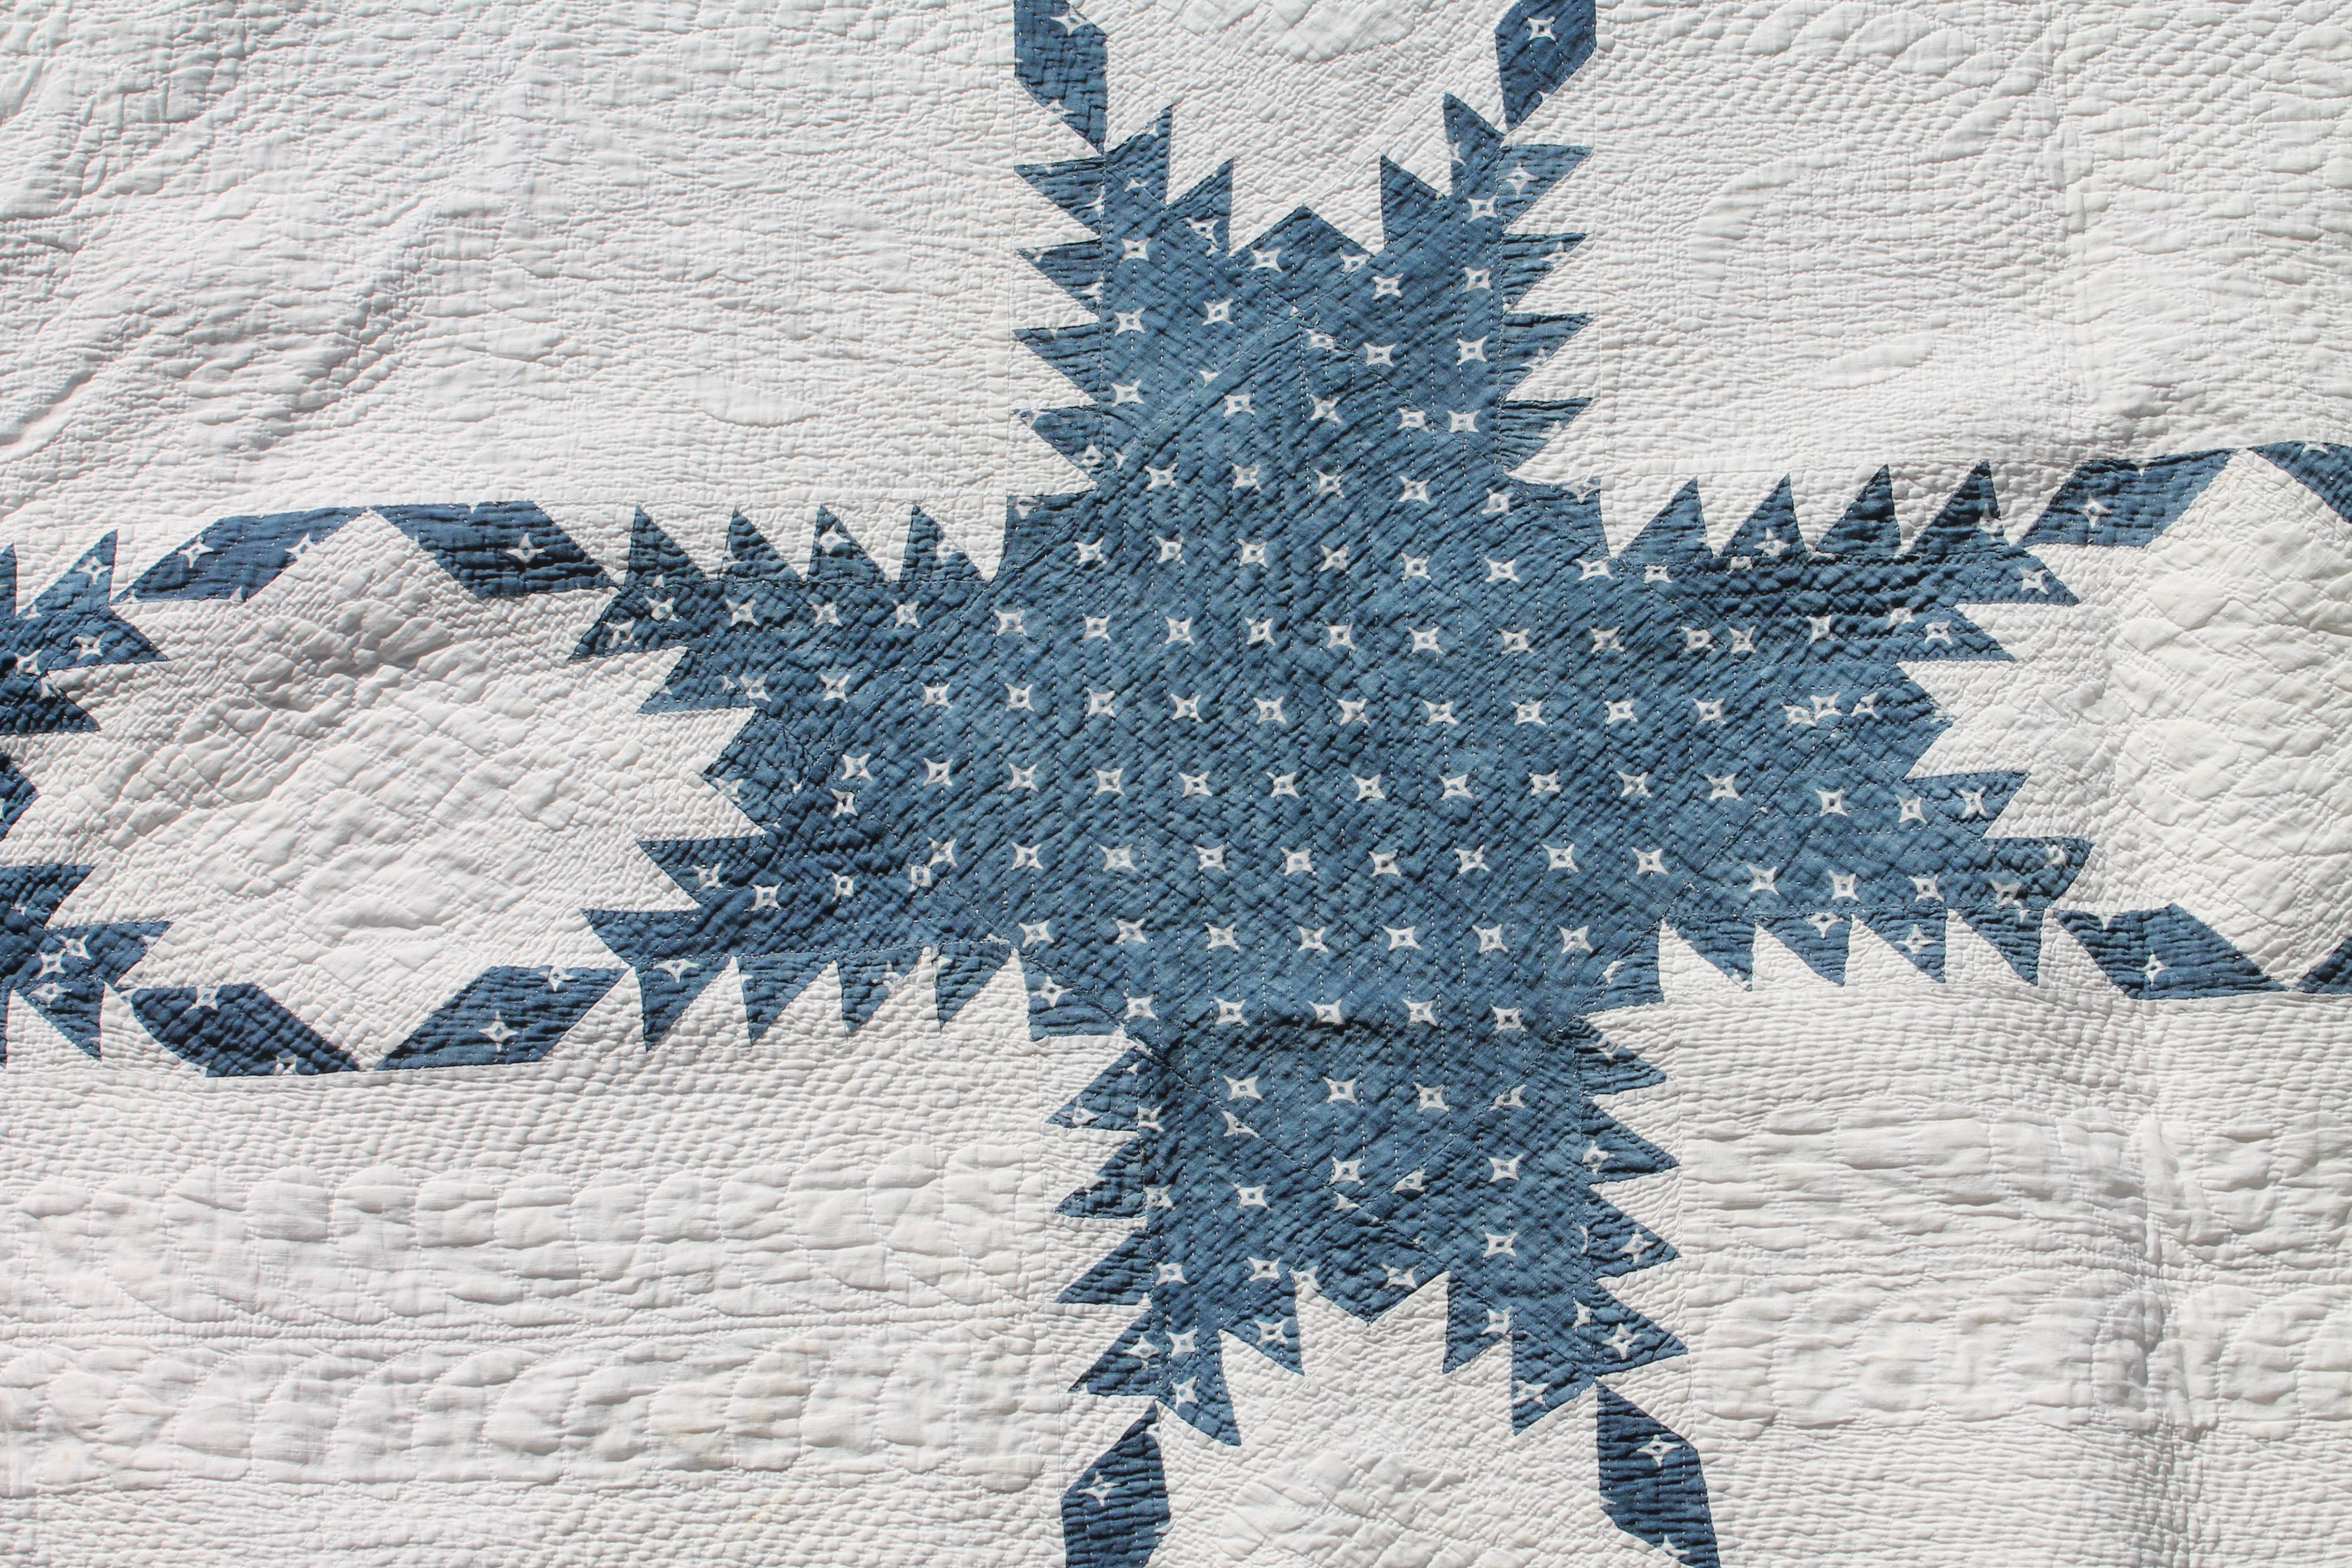 19thc fine blue & white feathered star quilt from Ohio. The quilt has fine piecing and quilting. Detailed quilting looks like stippled quilting.